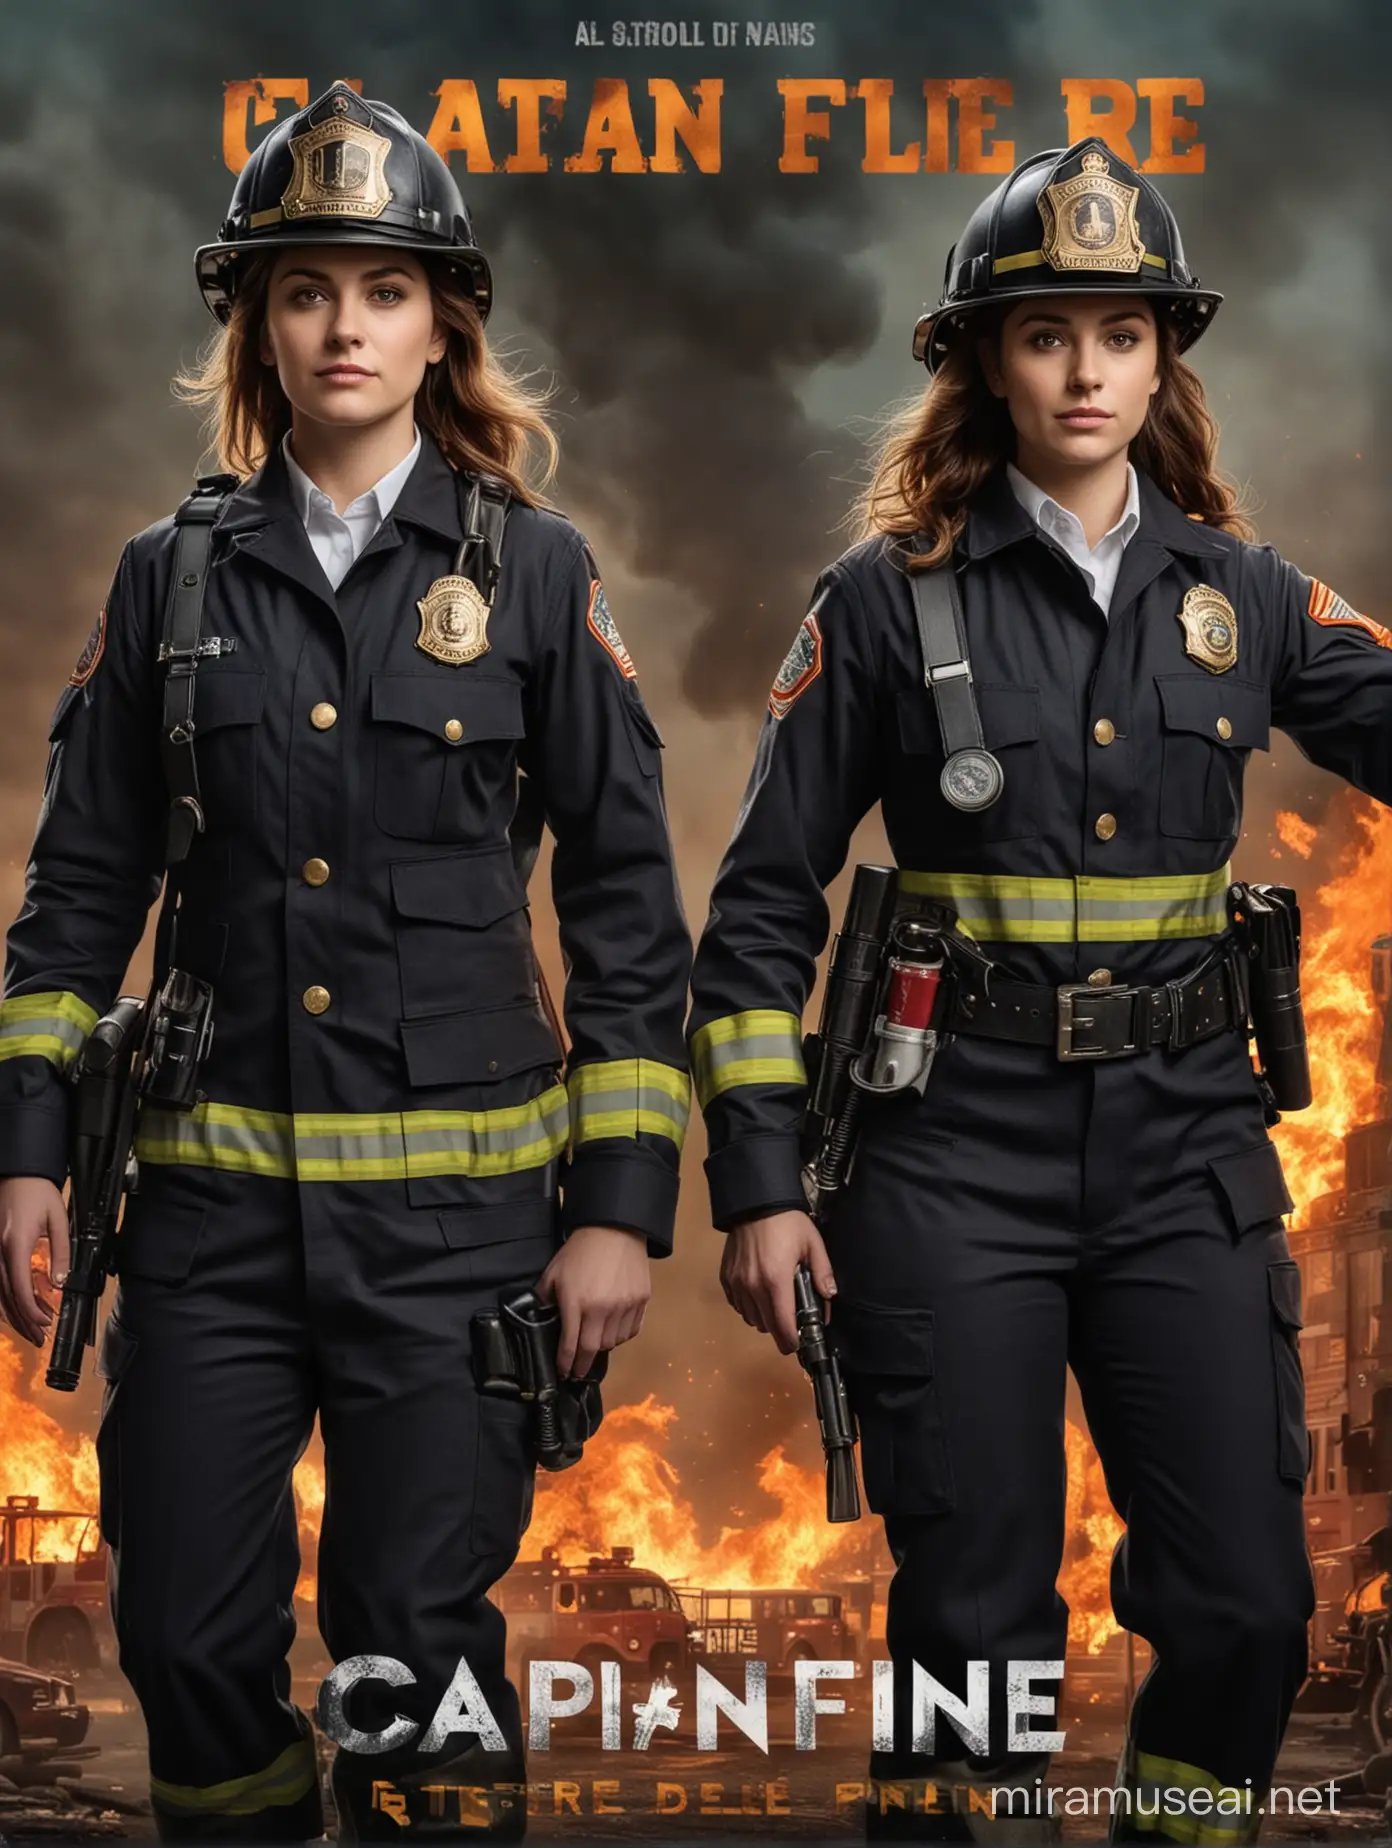 Lesbian Detective and Fire Captain Uncover Arsonist Mystery